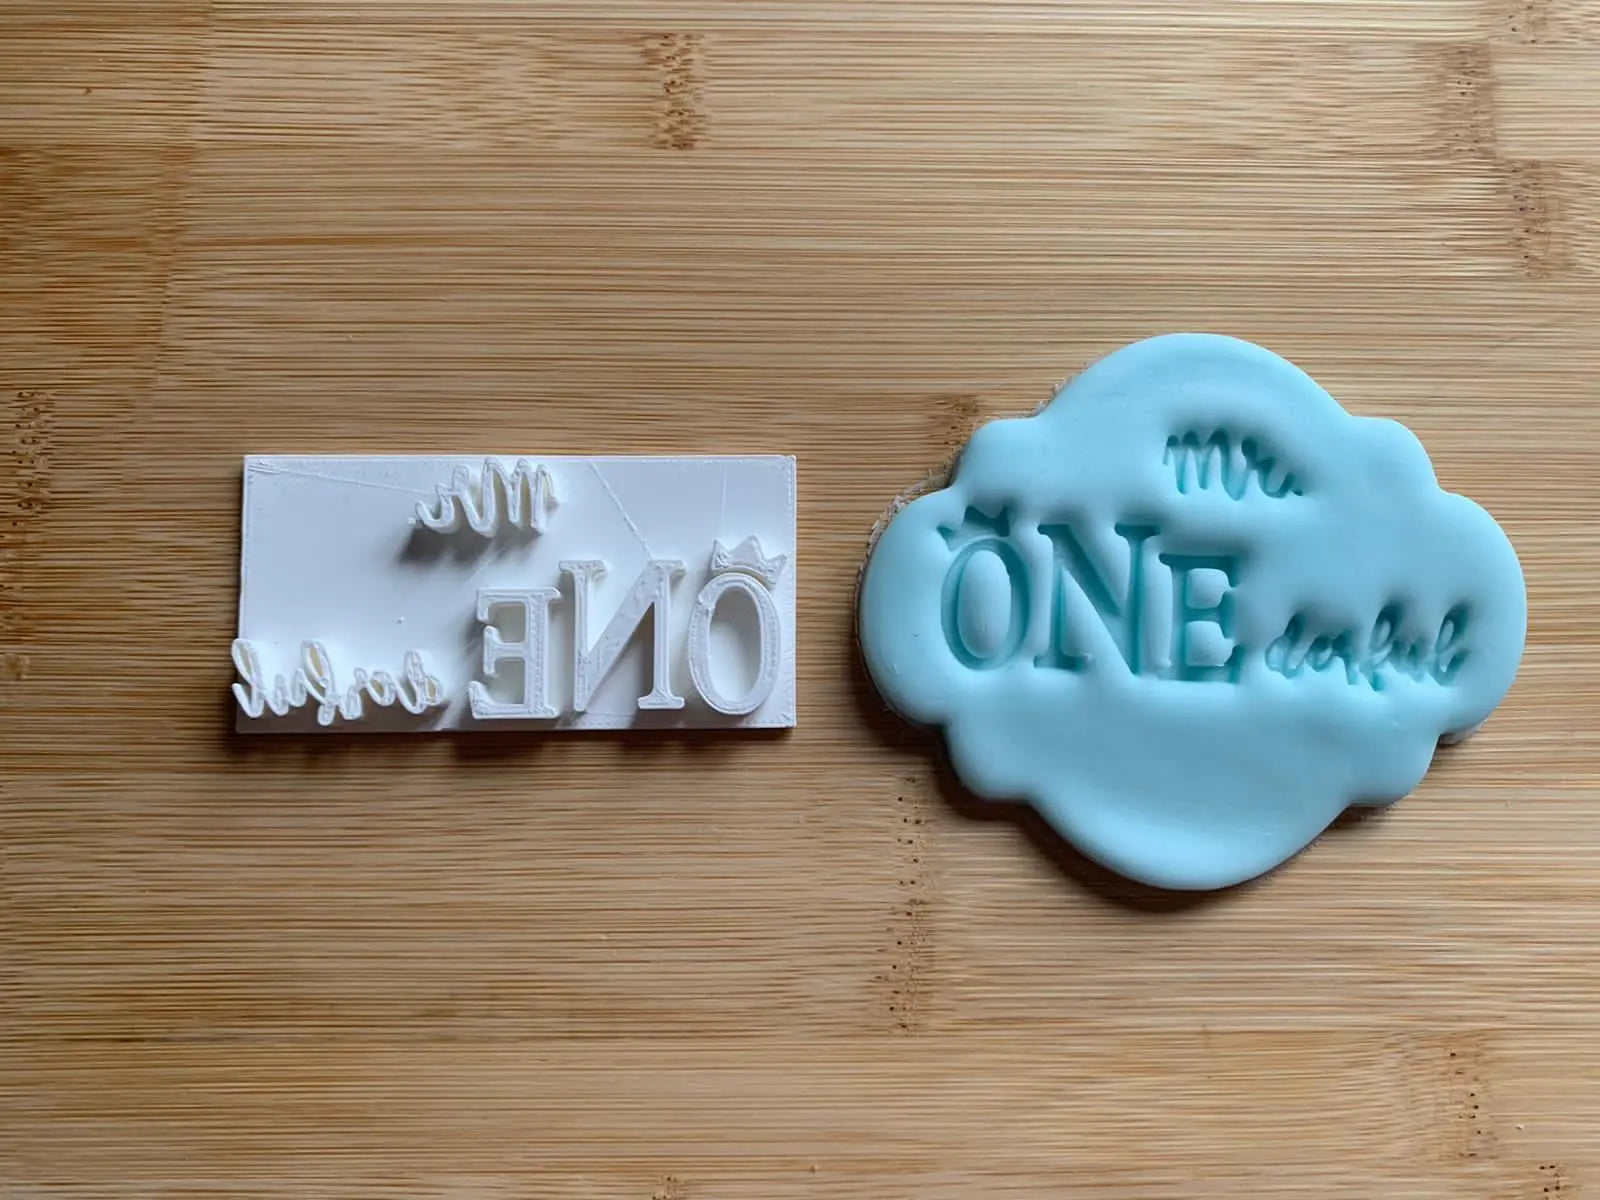 Mr. One Derful - Embossing stamps MEG cookie cutters